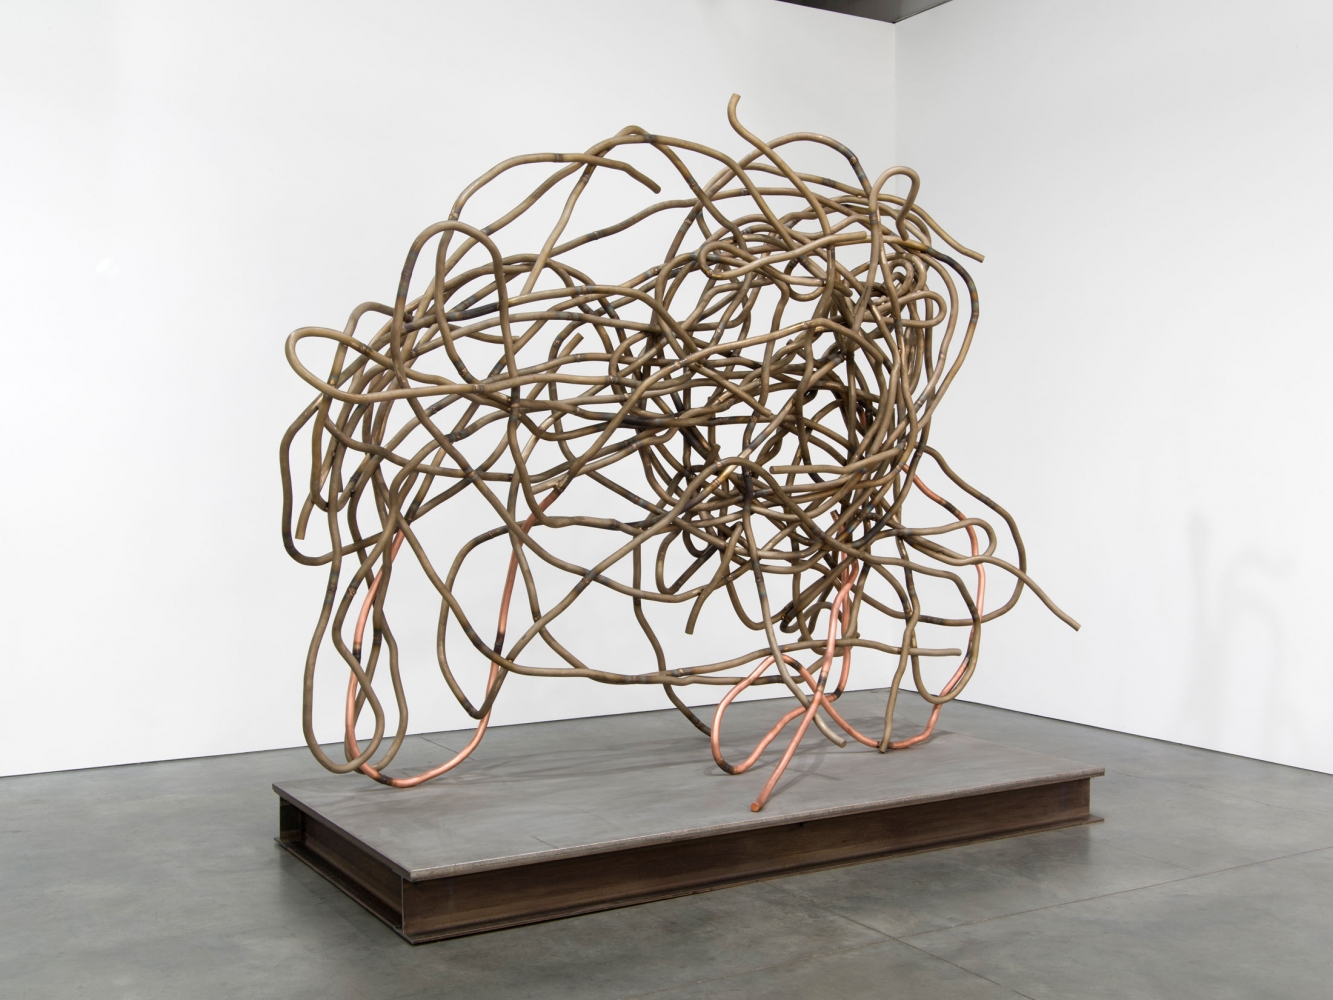 Christopher Wool
Untitled, 2014
Bronze
123 1/2 x 148 x 63 3/4 inches
(313.7 x 375.9 x 161.9 cm)